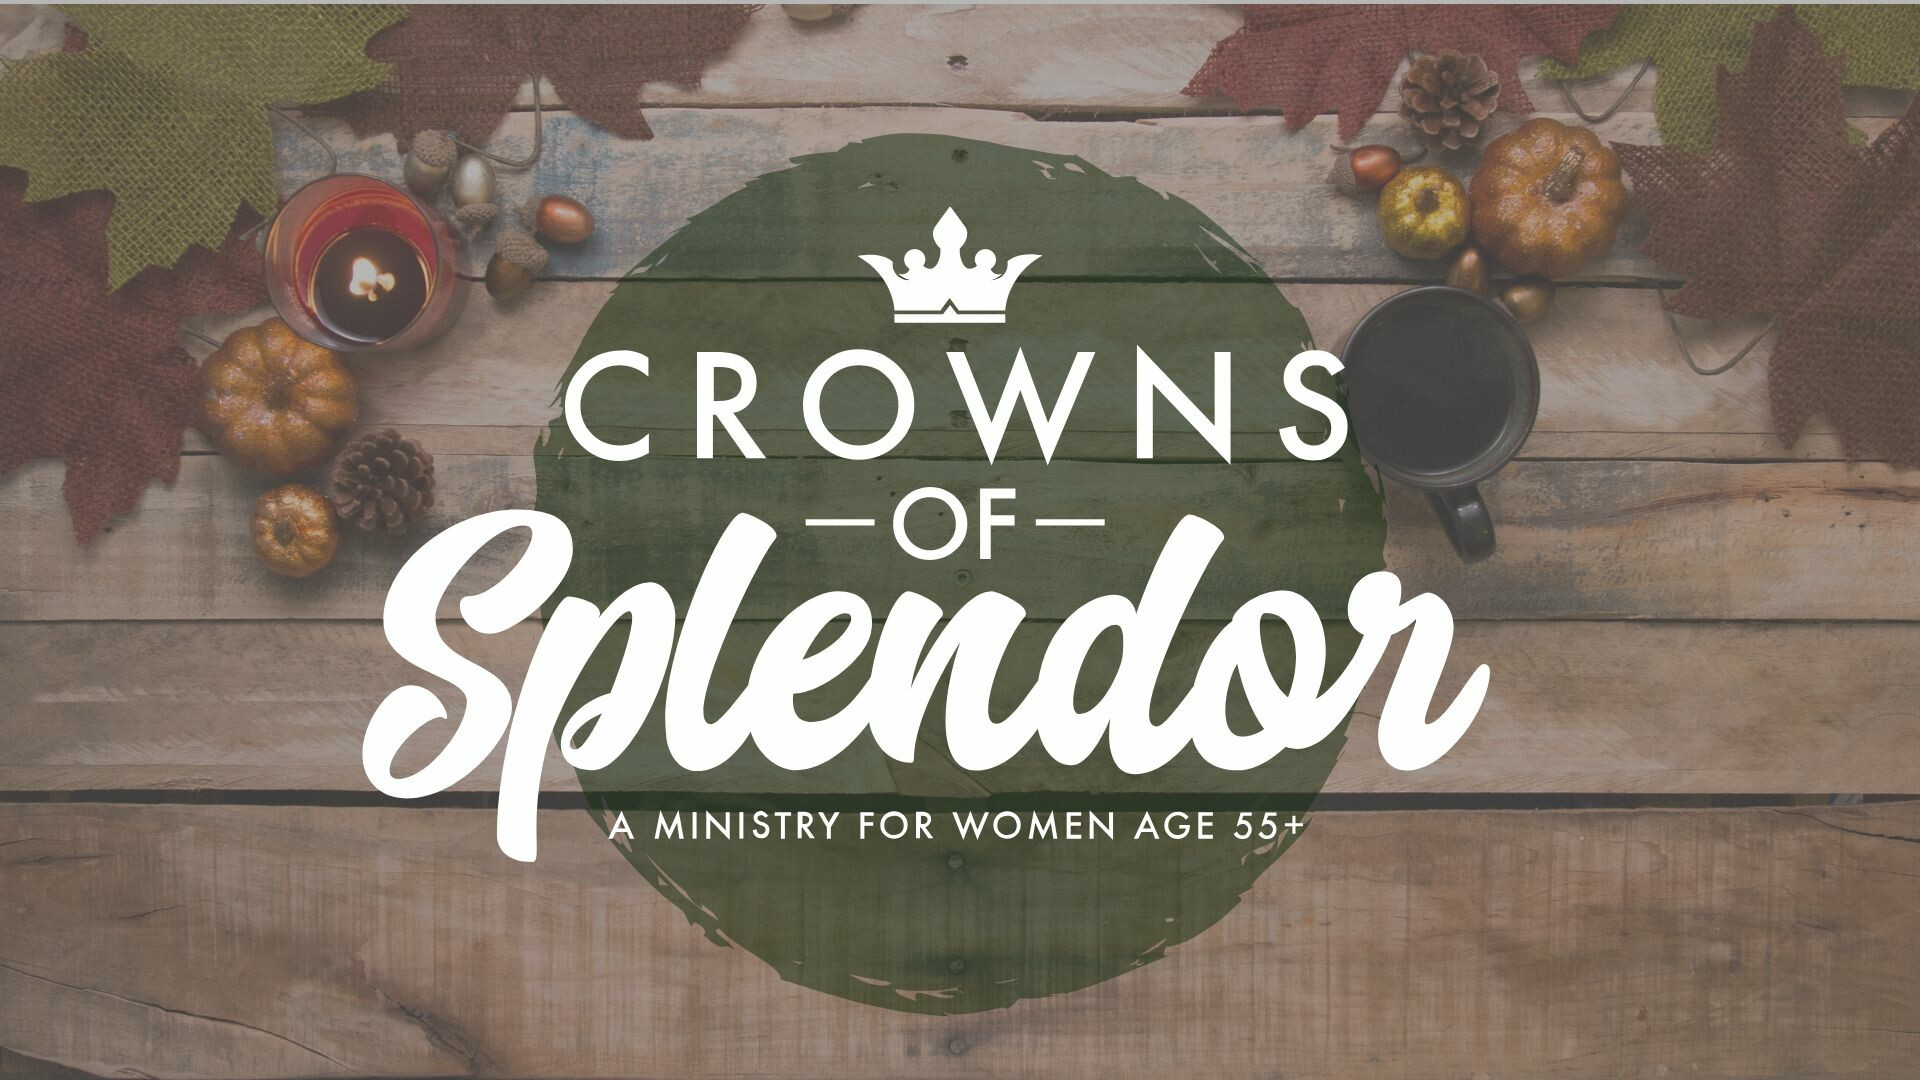 Crowns of Splendor: Lunch and Learn